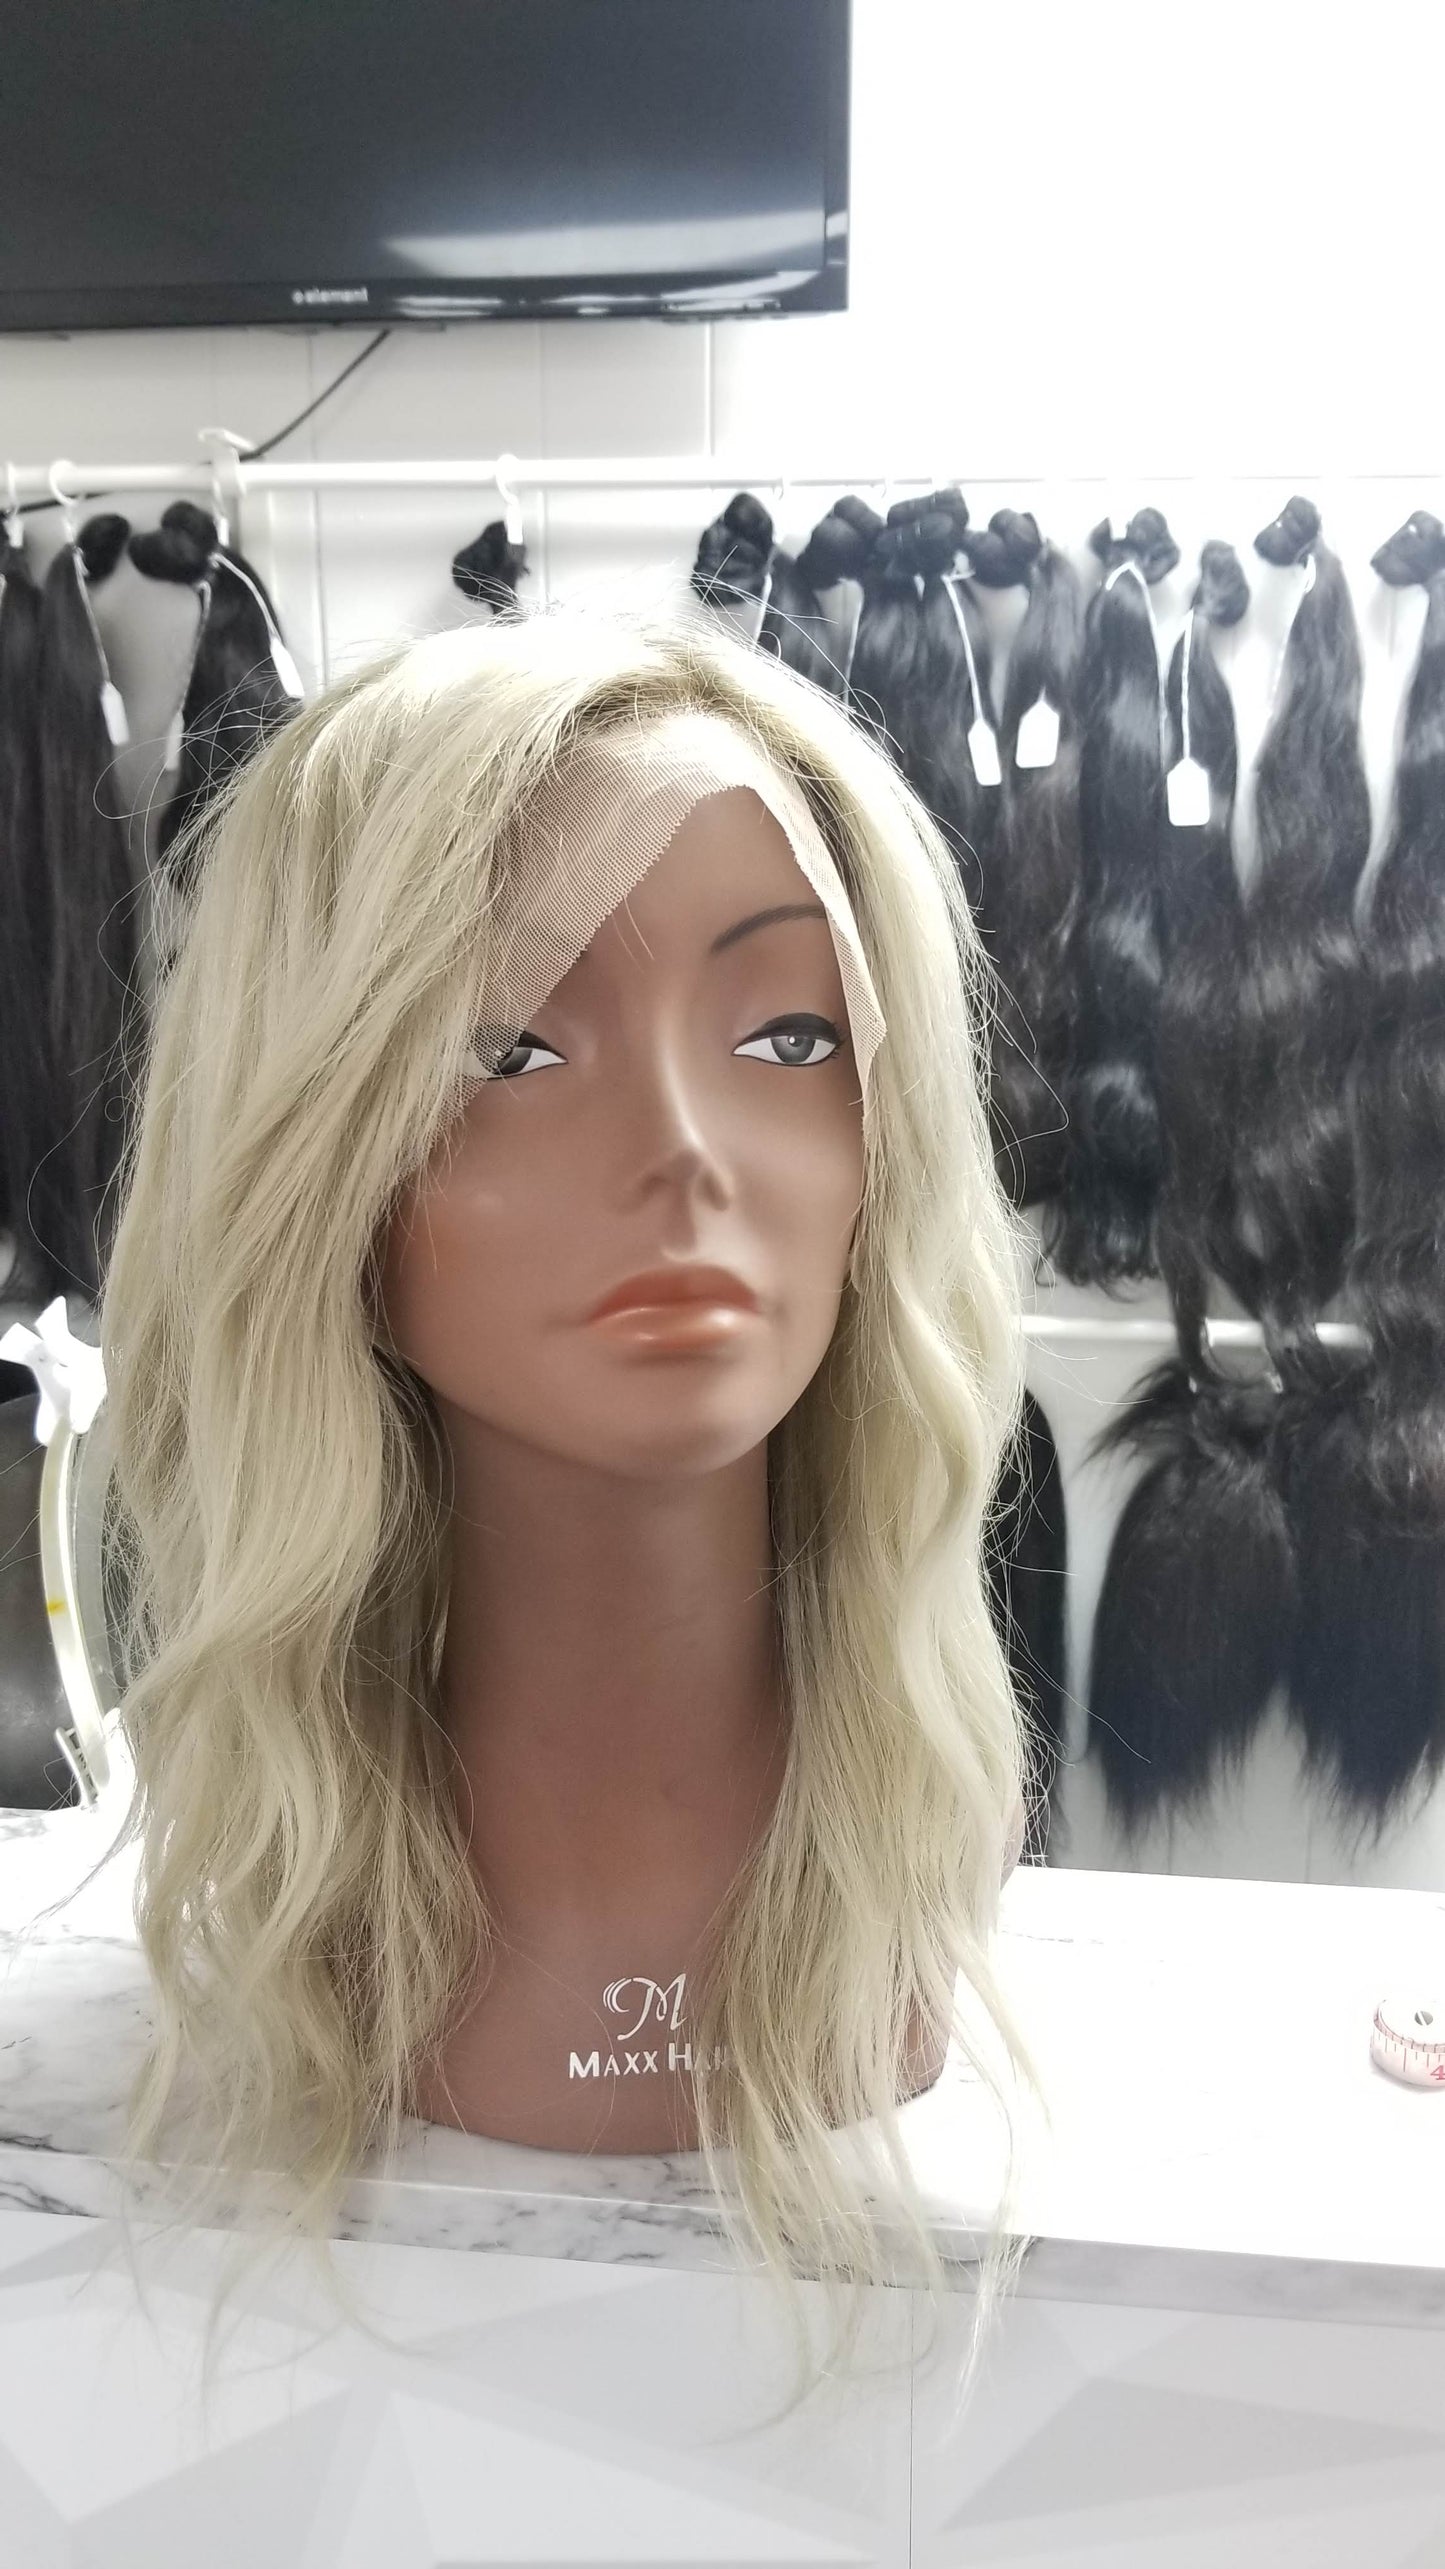 Pre-Colored Full Lace Wig Unit. Light Blonde #60 with Medium Blonde #8 Root